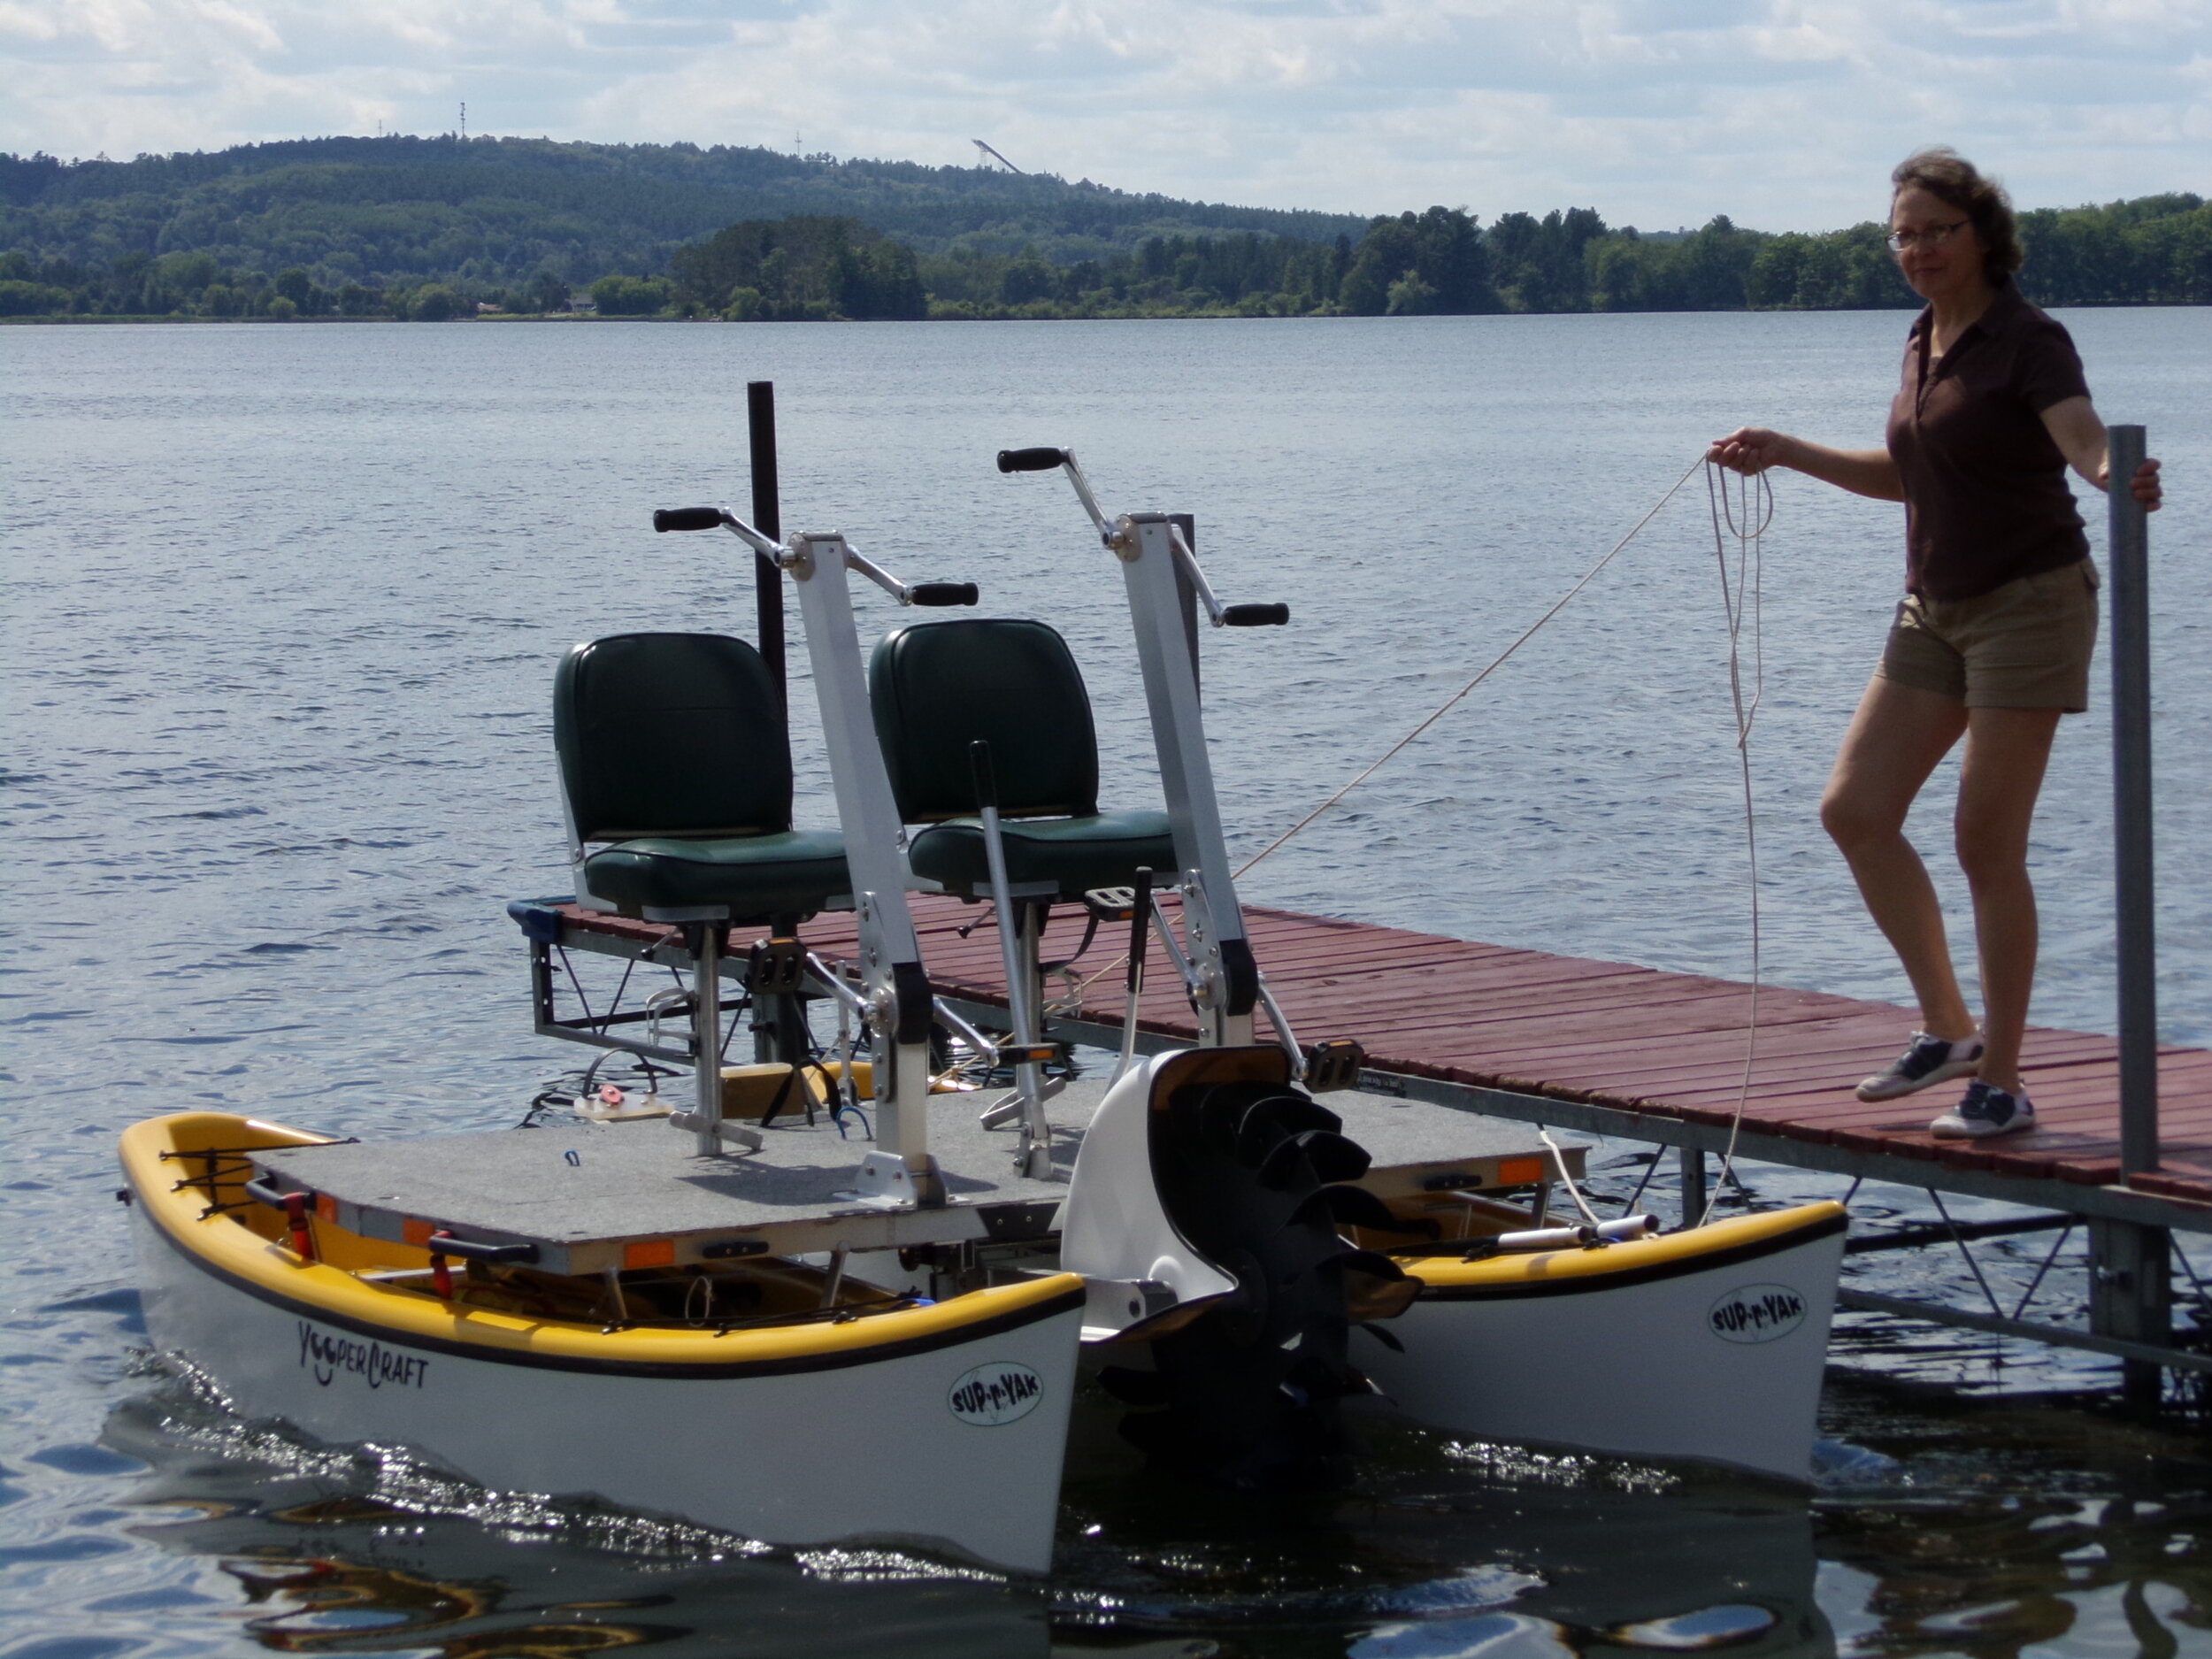 TURBO P-2 SUP-or-YAK: 2-person pedal boat + 2 hybrid kayaks, hand